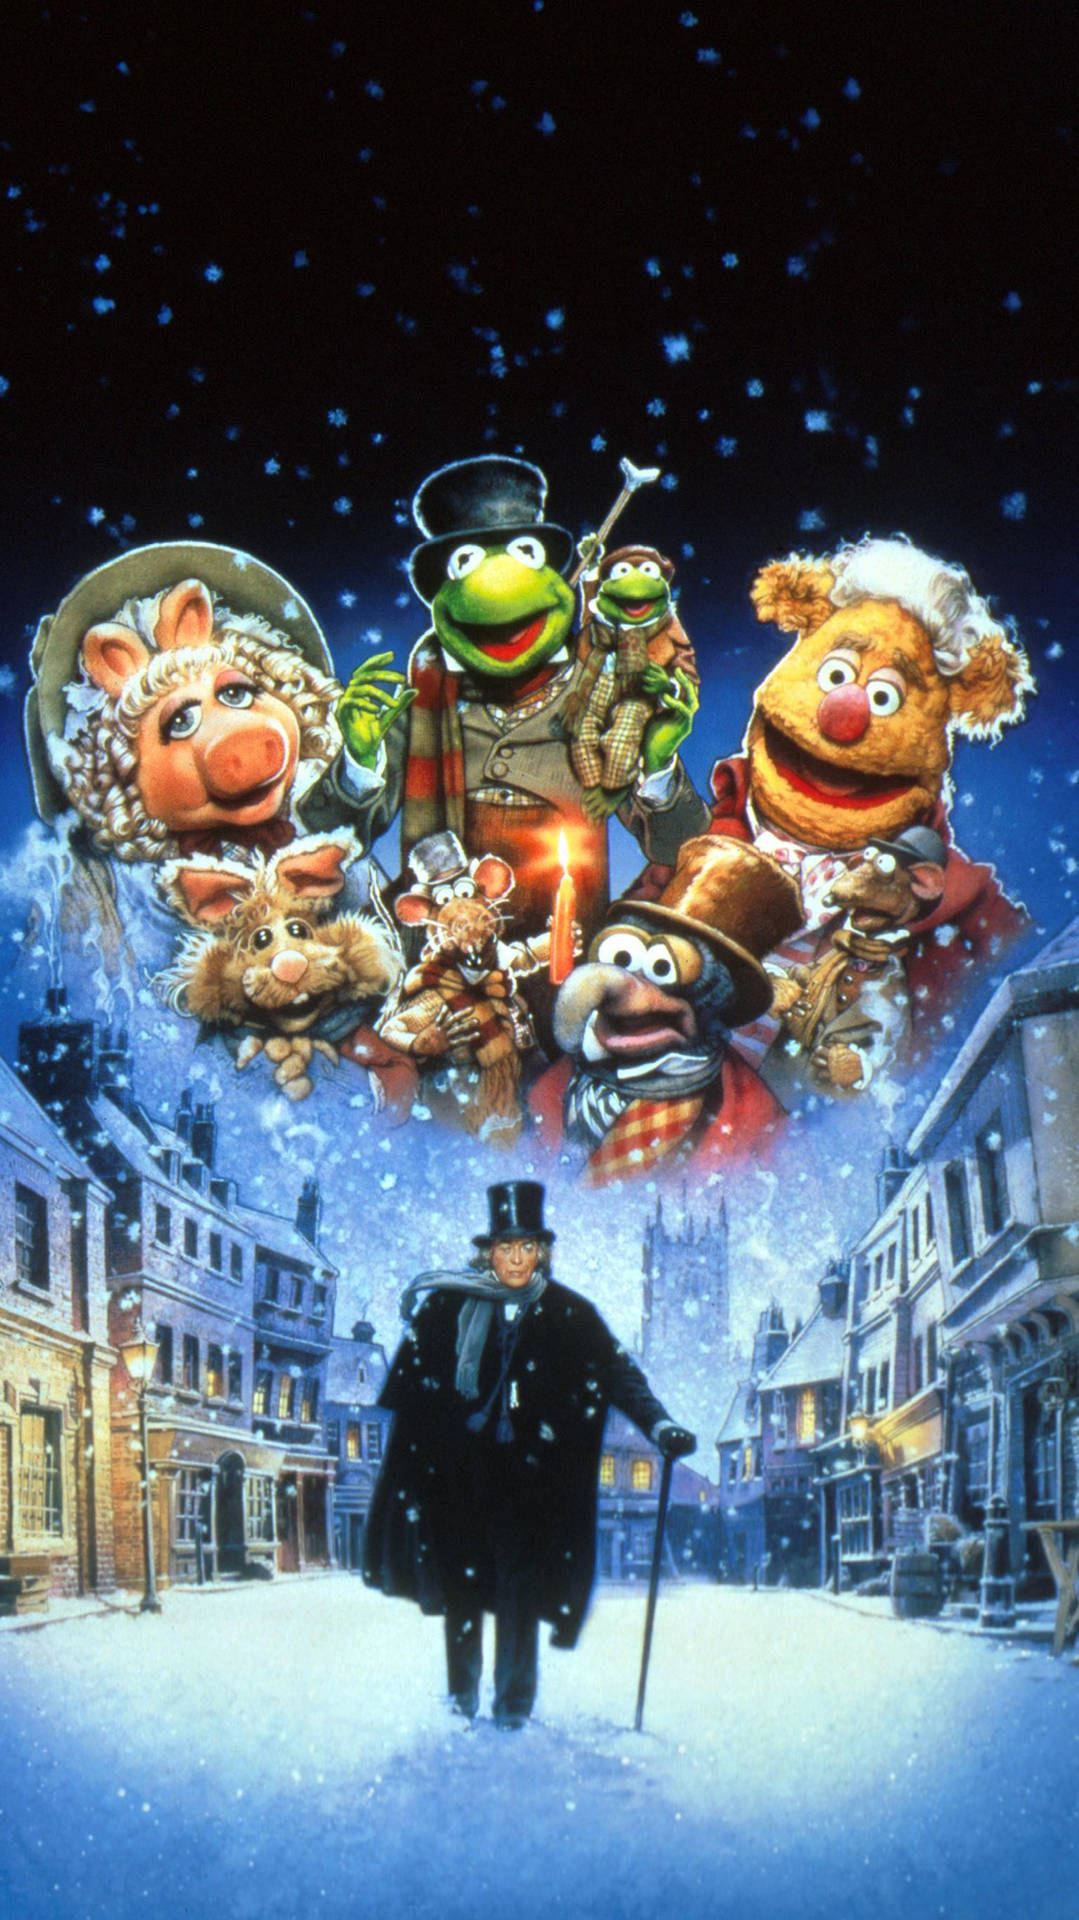 Scrooge In The Muppets: A Christmas Carol Background